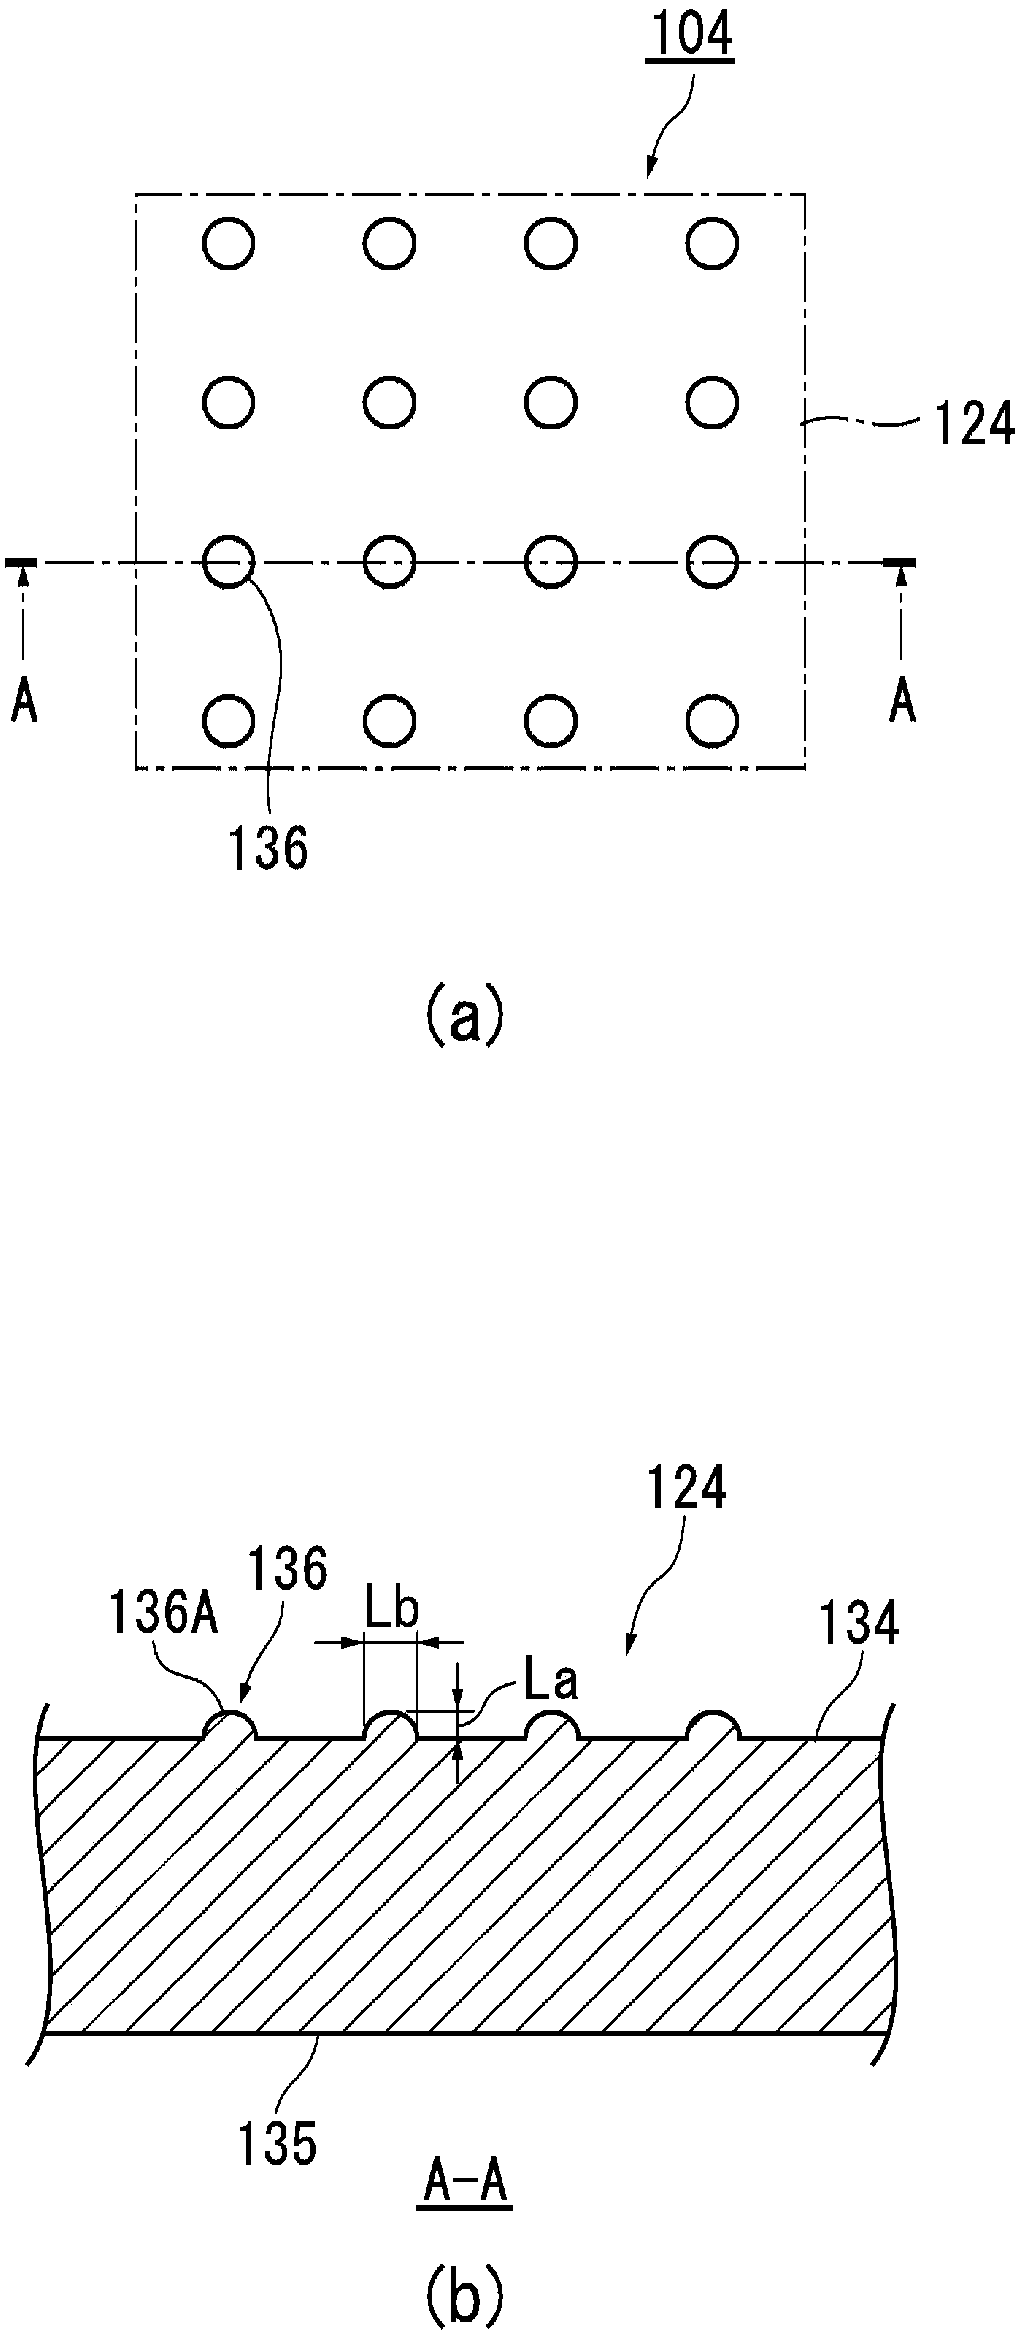 Carrier and substrate manufacturing method using this carrier